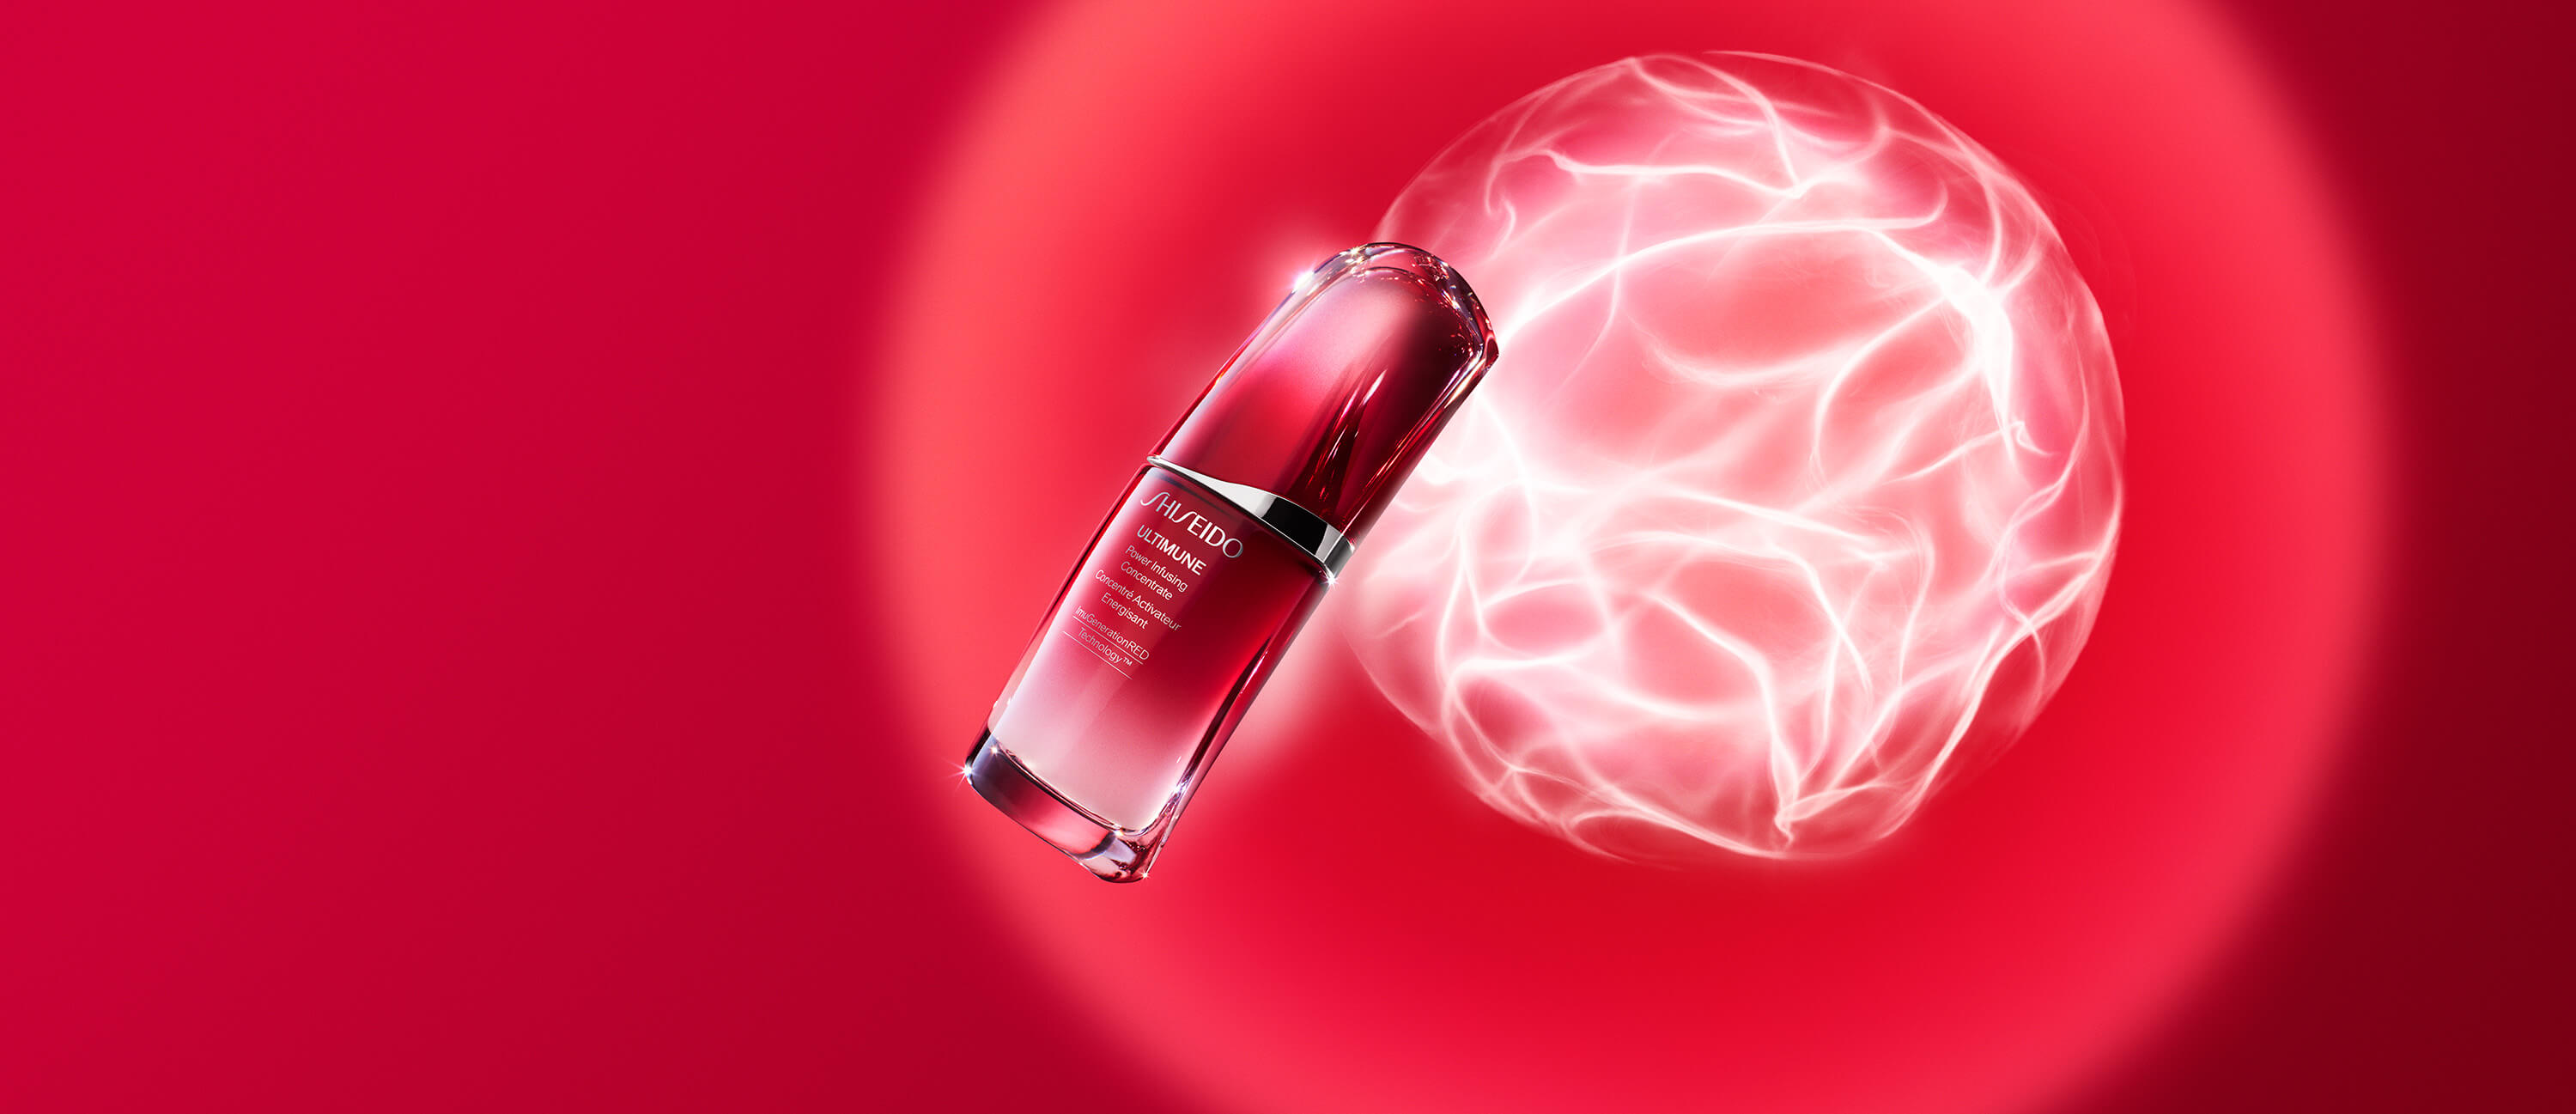 SHISEIDO Ultimune Power Infusing Concentrate